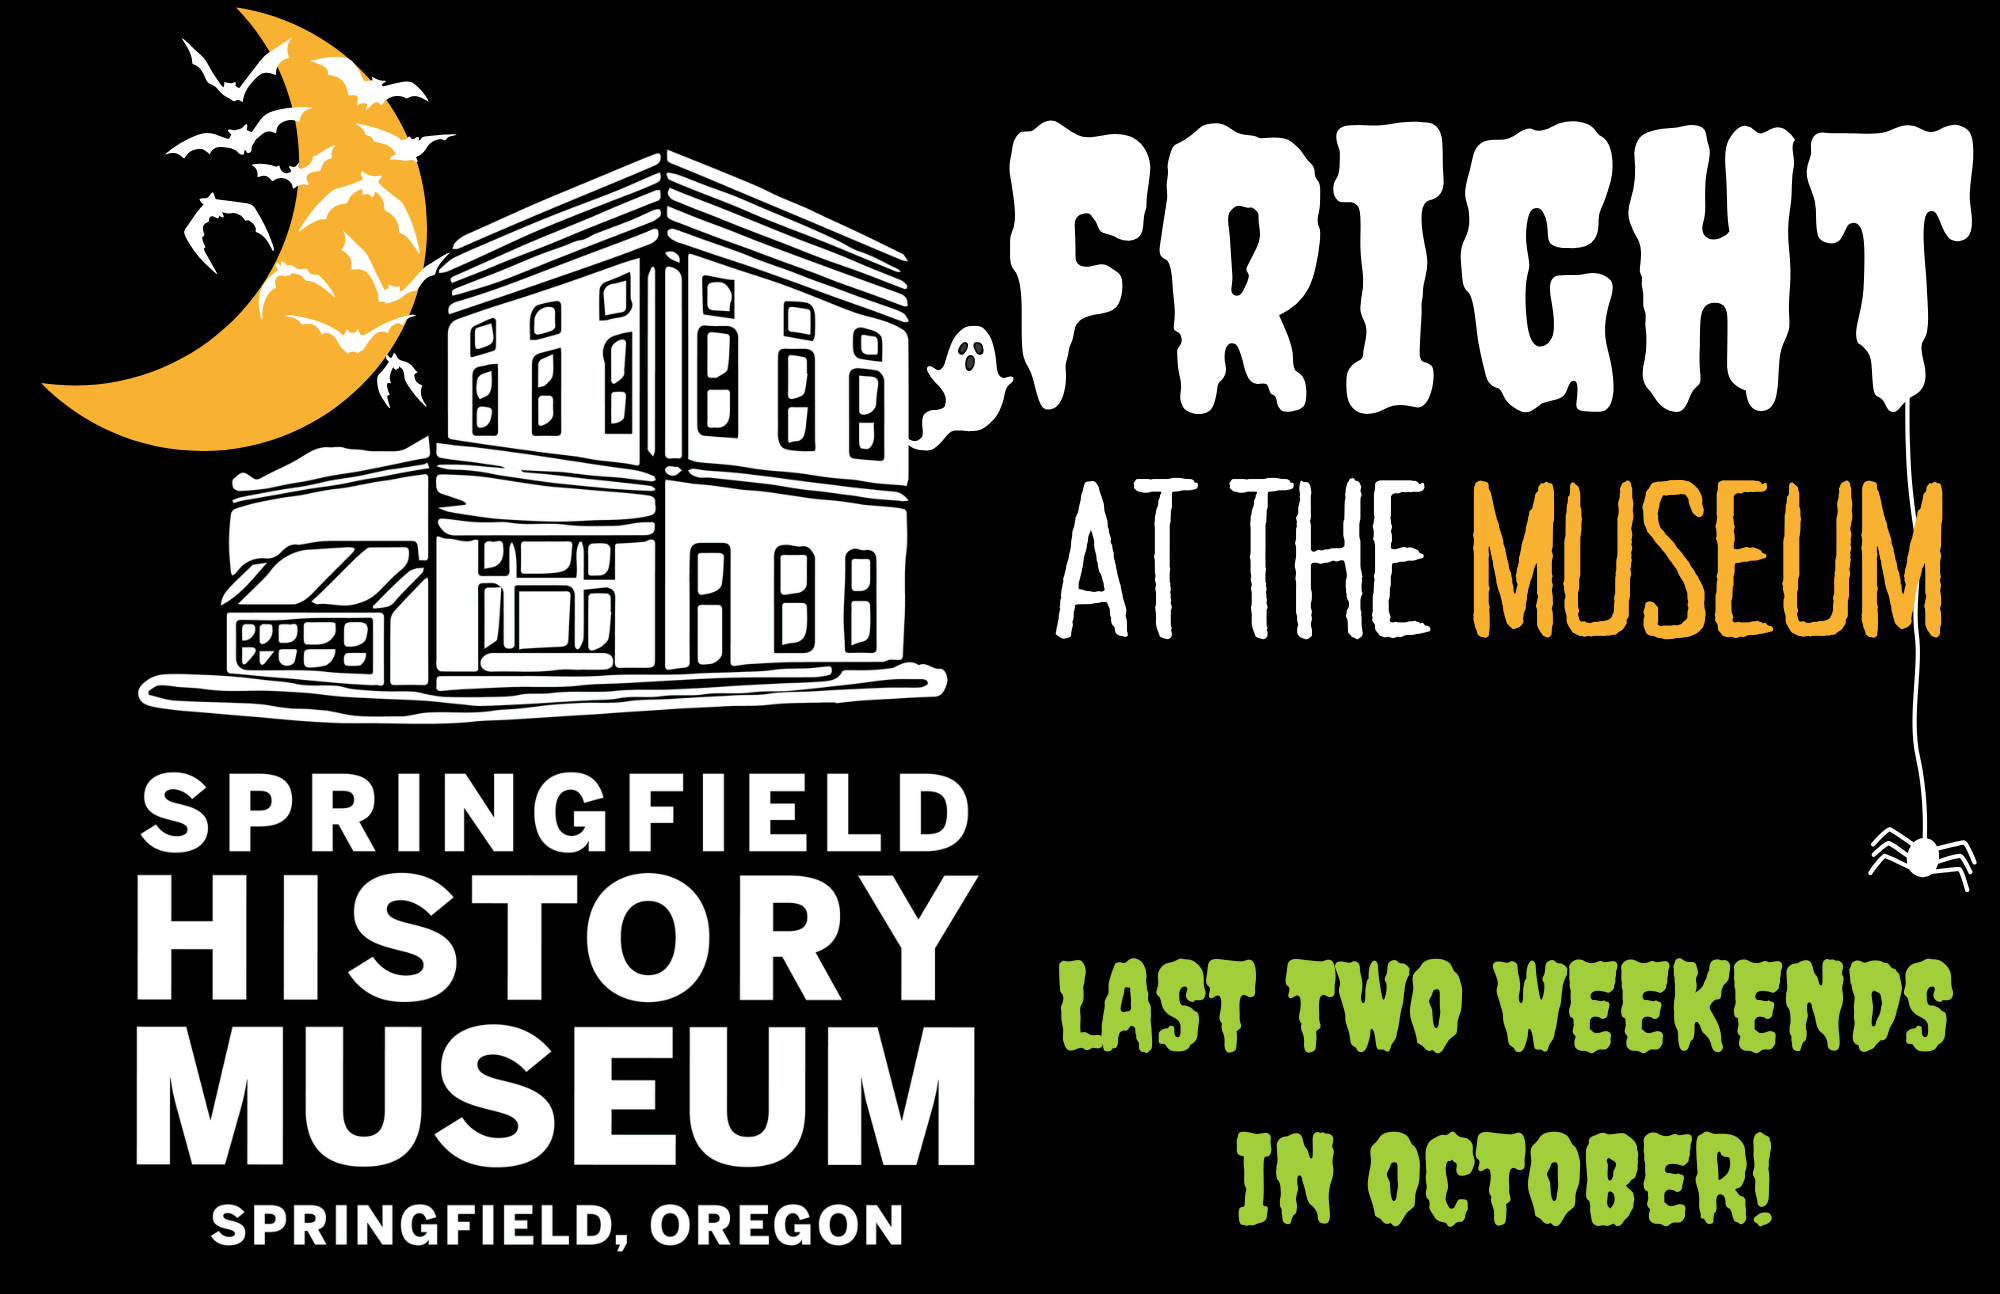 Fright at the Museum Haunted House graphic